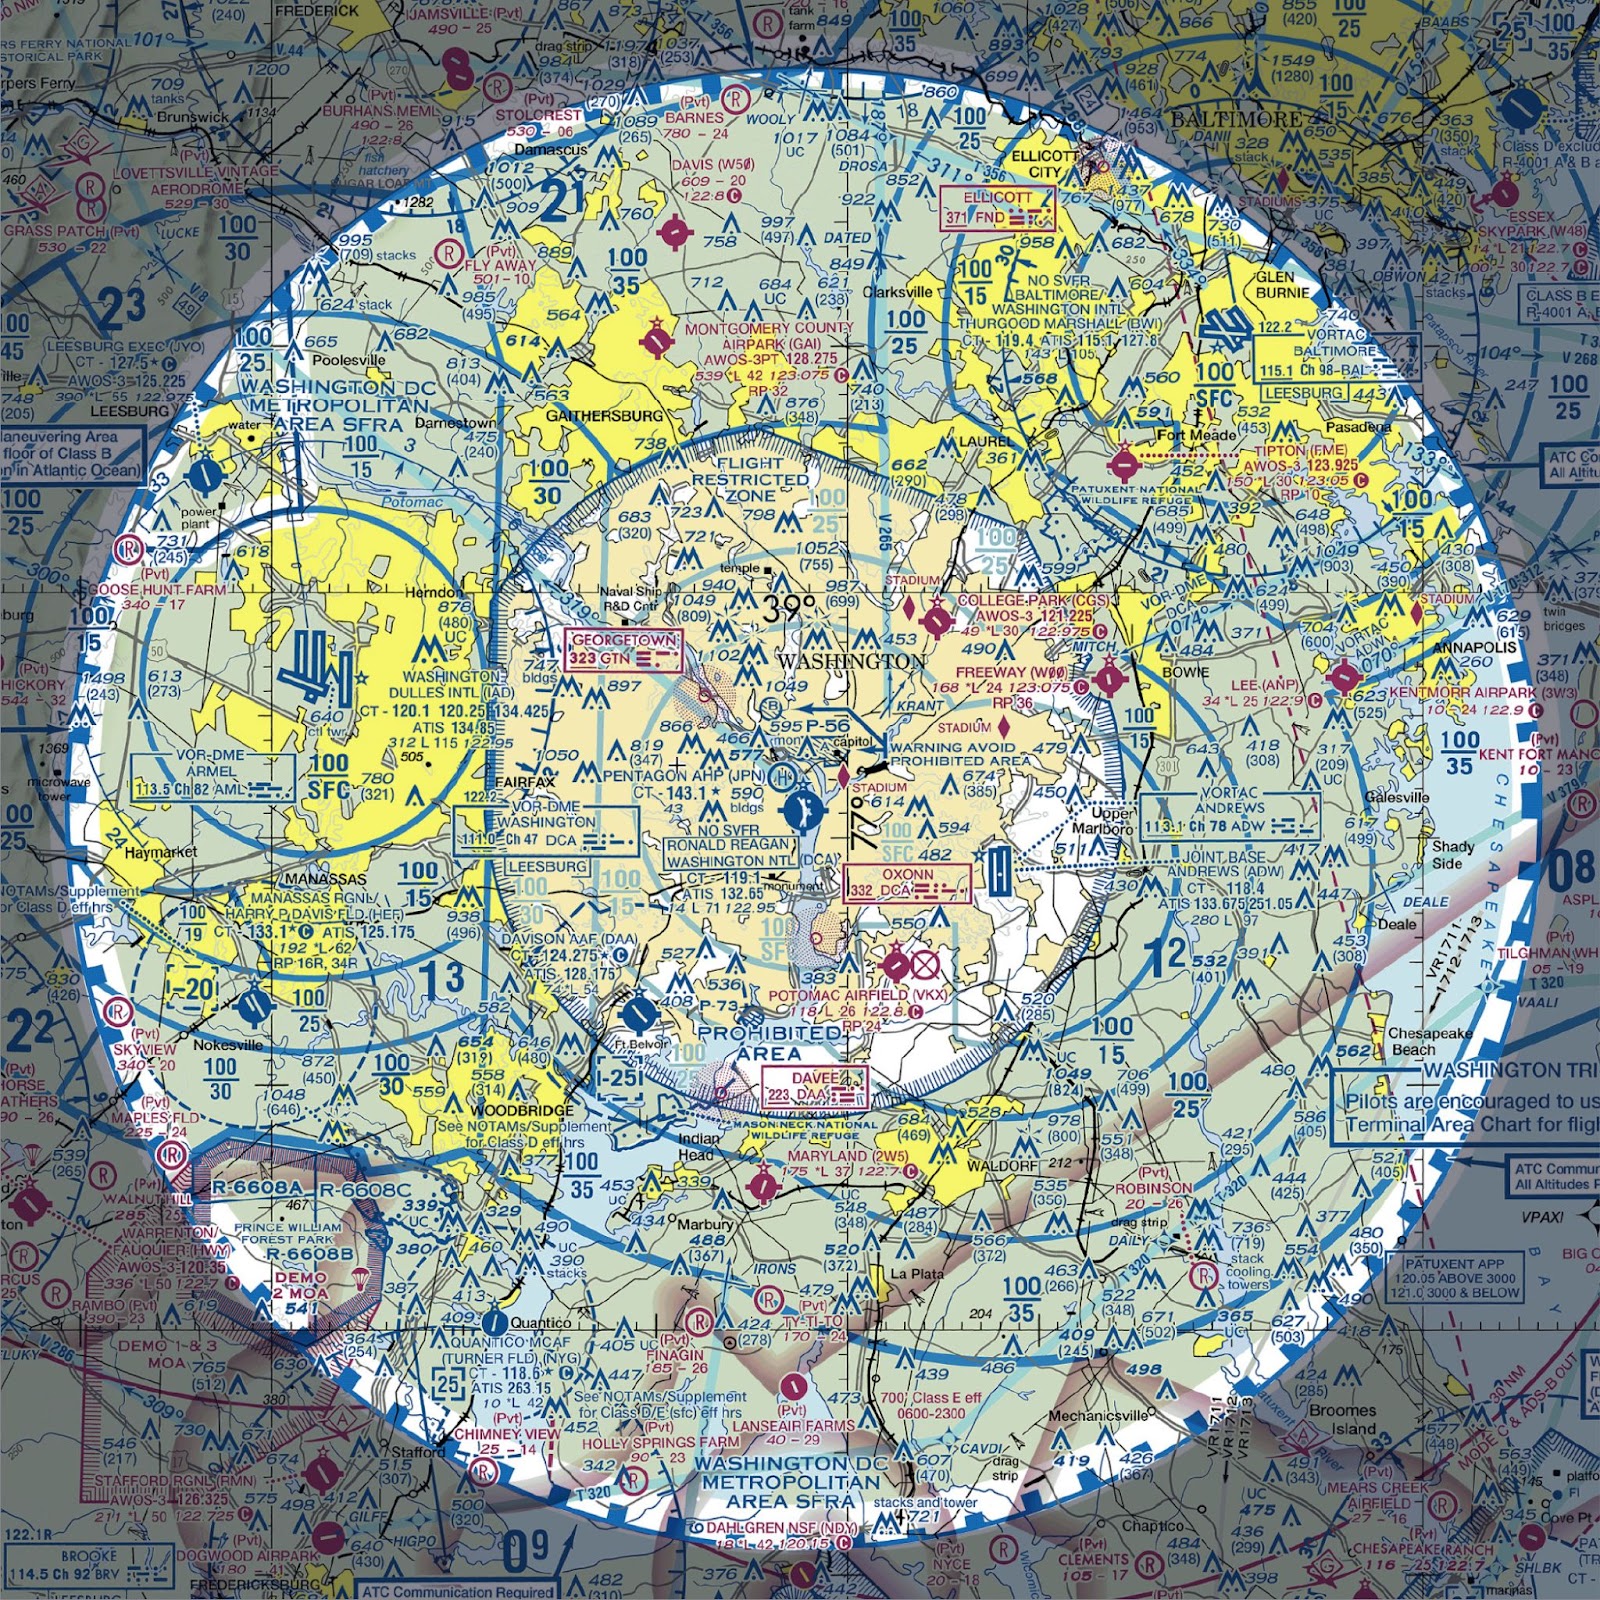 A diagram depicting a Special Flight Rules Area (SFRA) on a sectional chart.